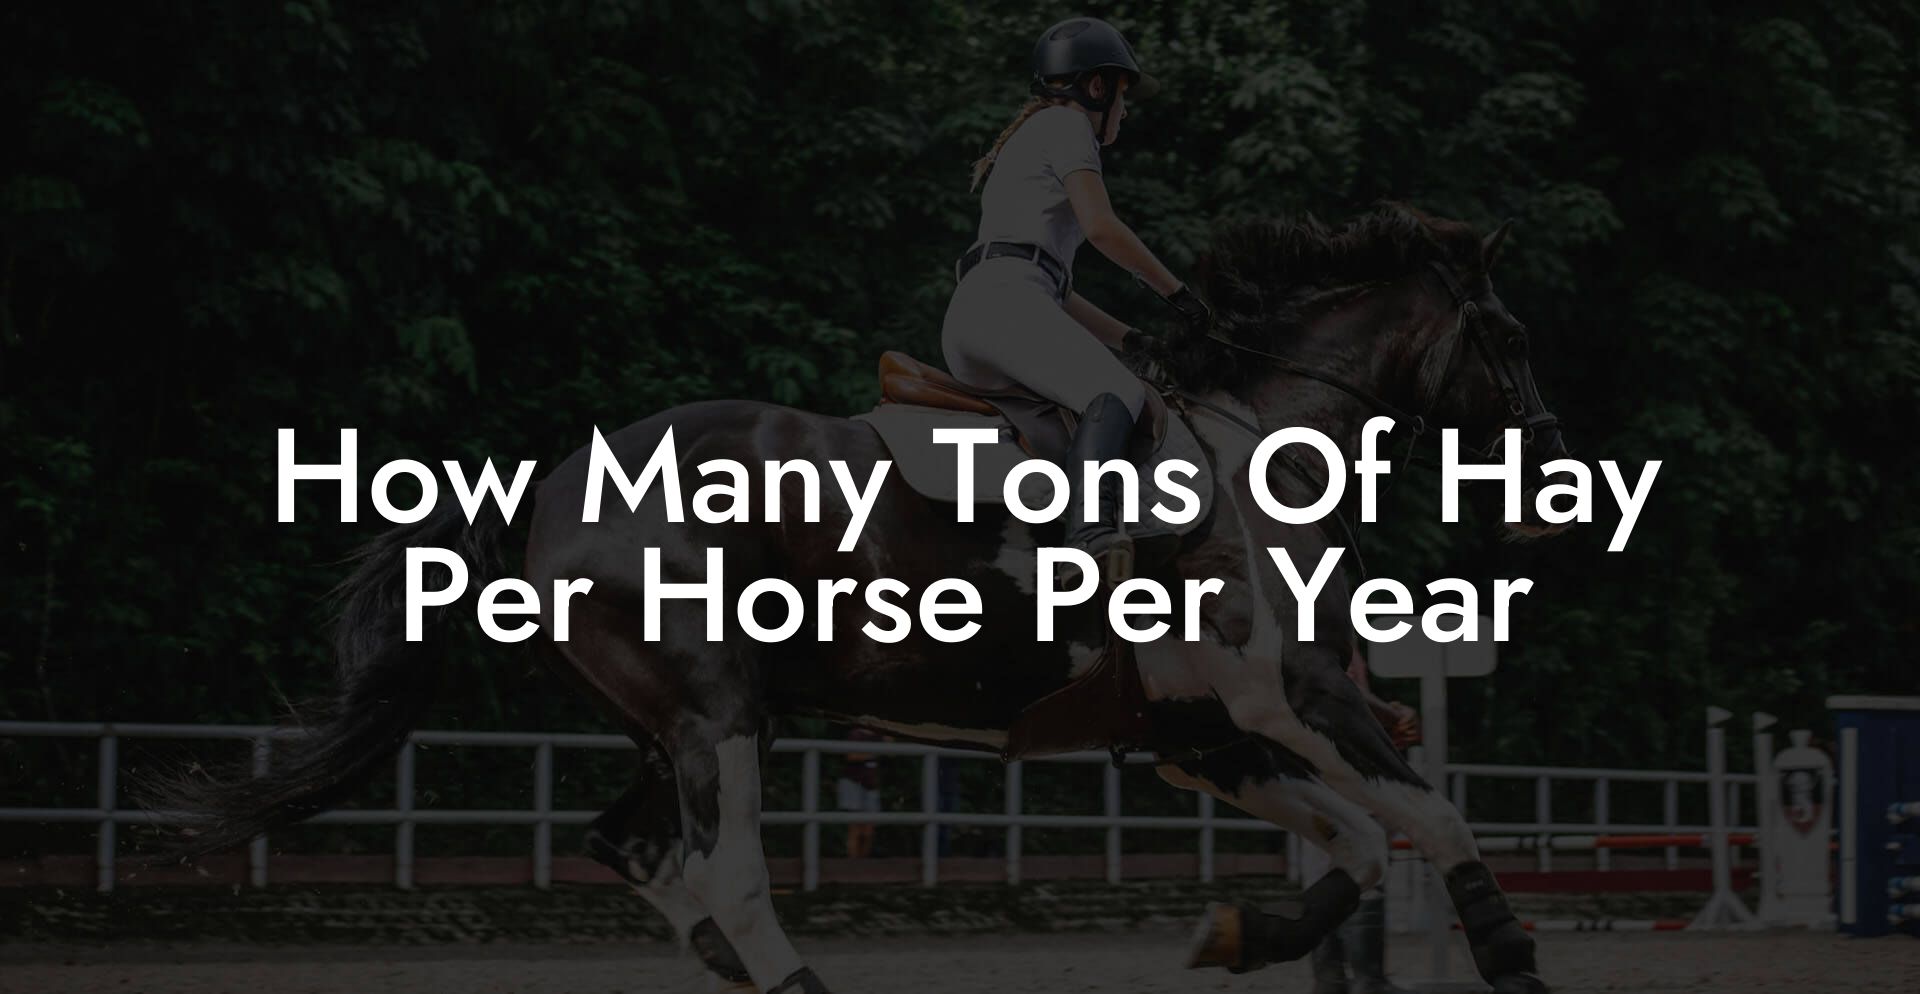 How Many Tons Of Hay Per Horse Per Year